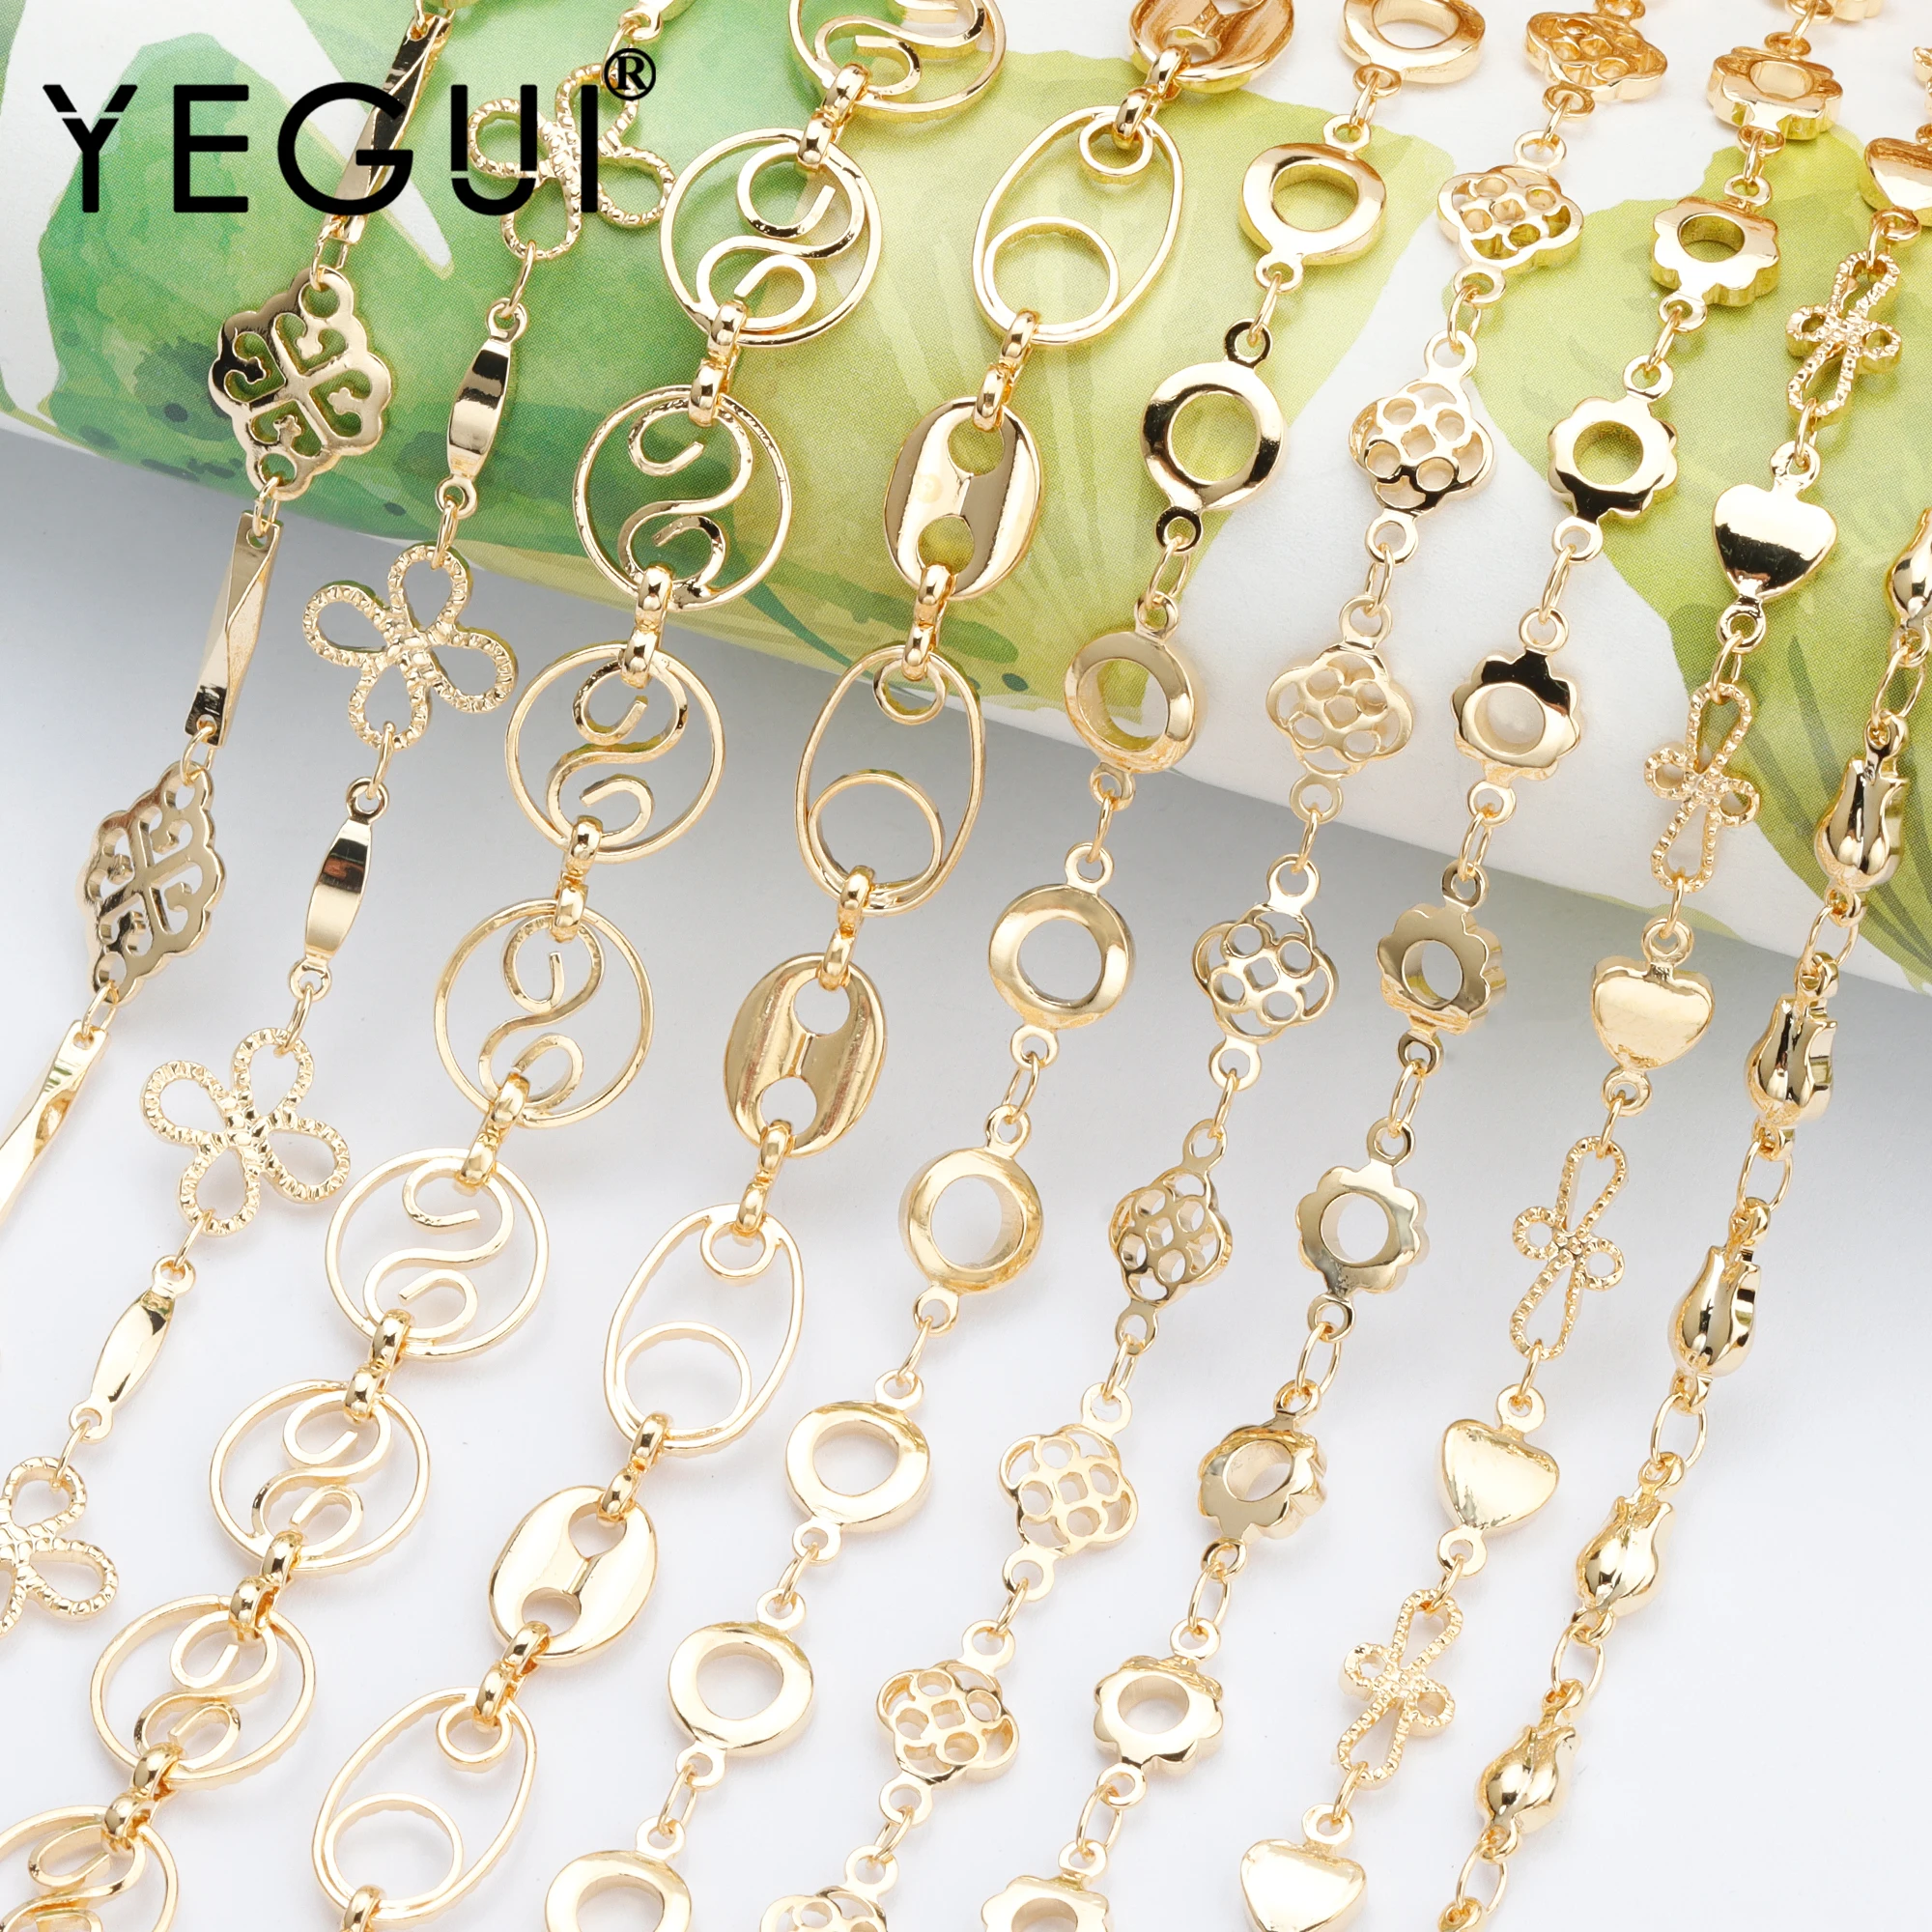 YEGUI C164,jewelry accessories,diy chain,18k gold plated,0.3microns,copper metal,diy bracelet necklace,jewelry making,1m/lot